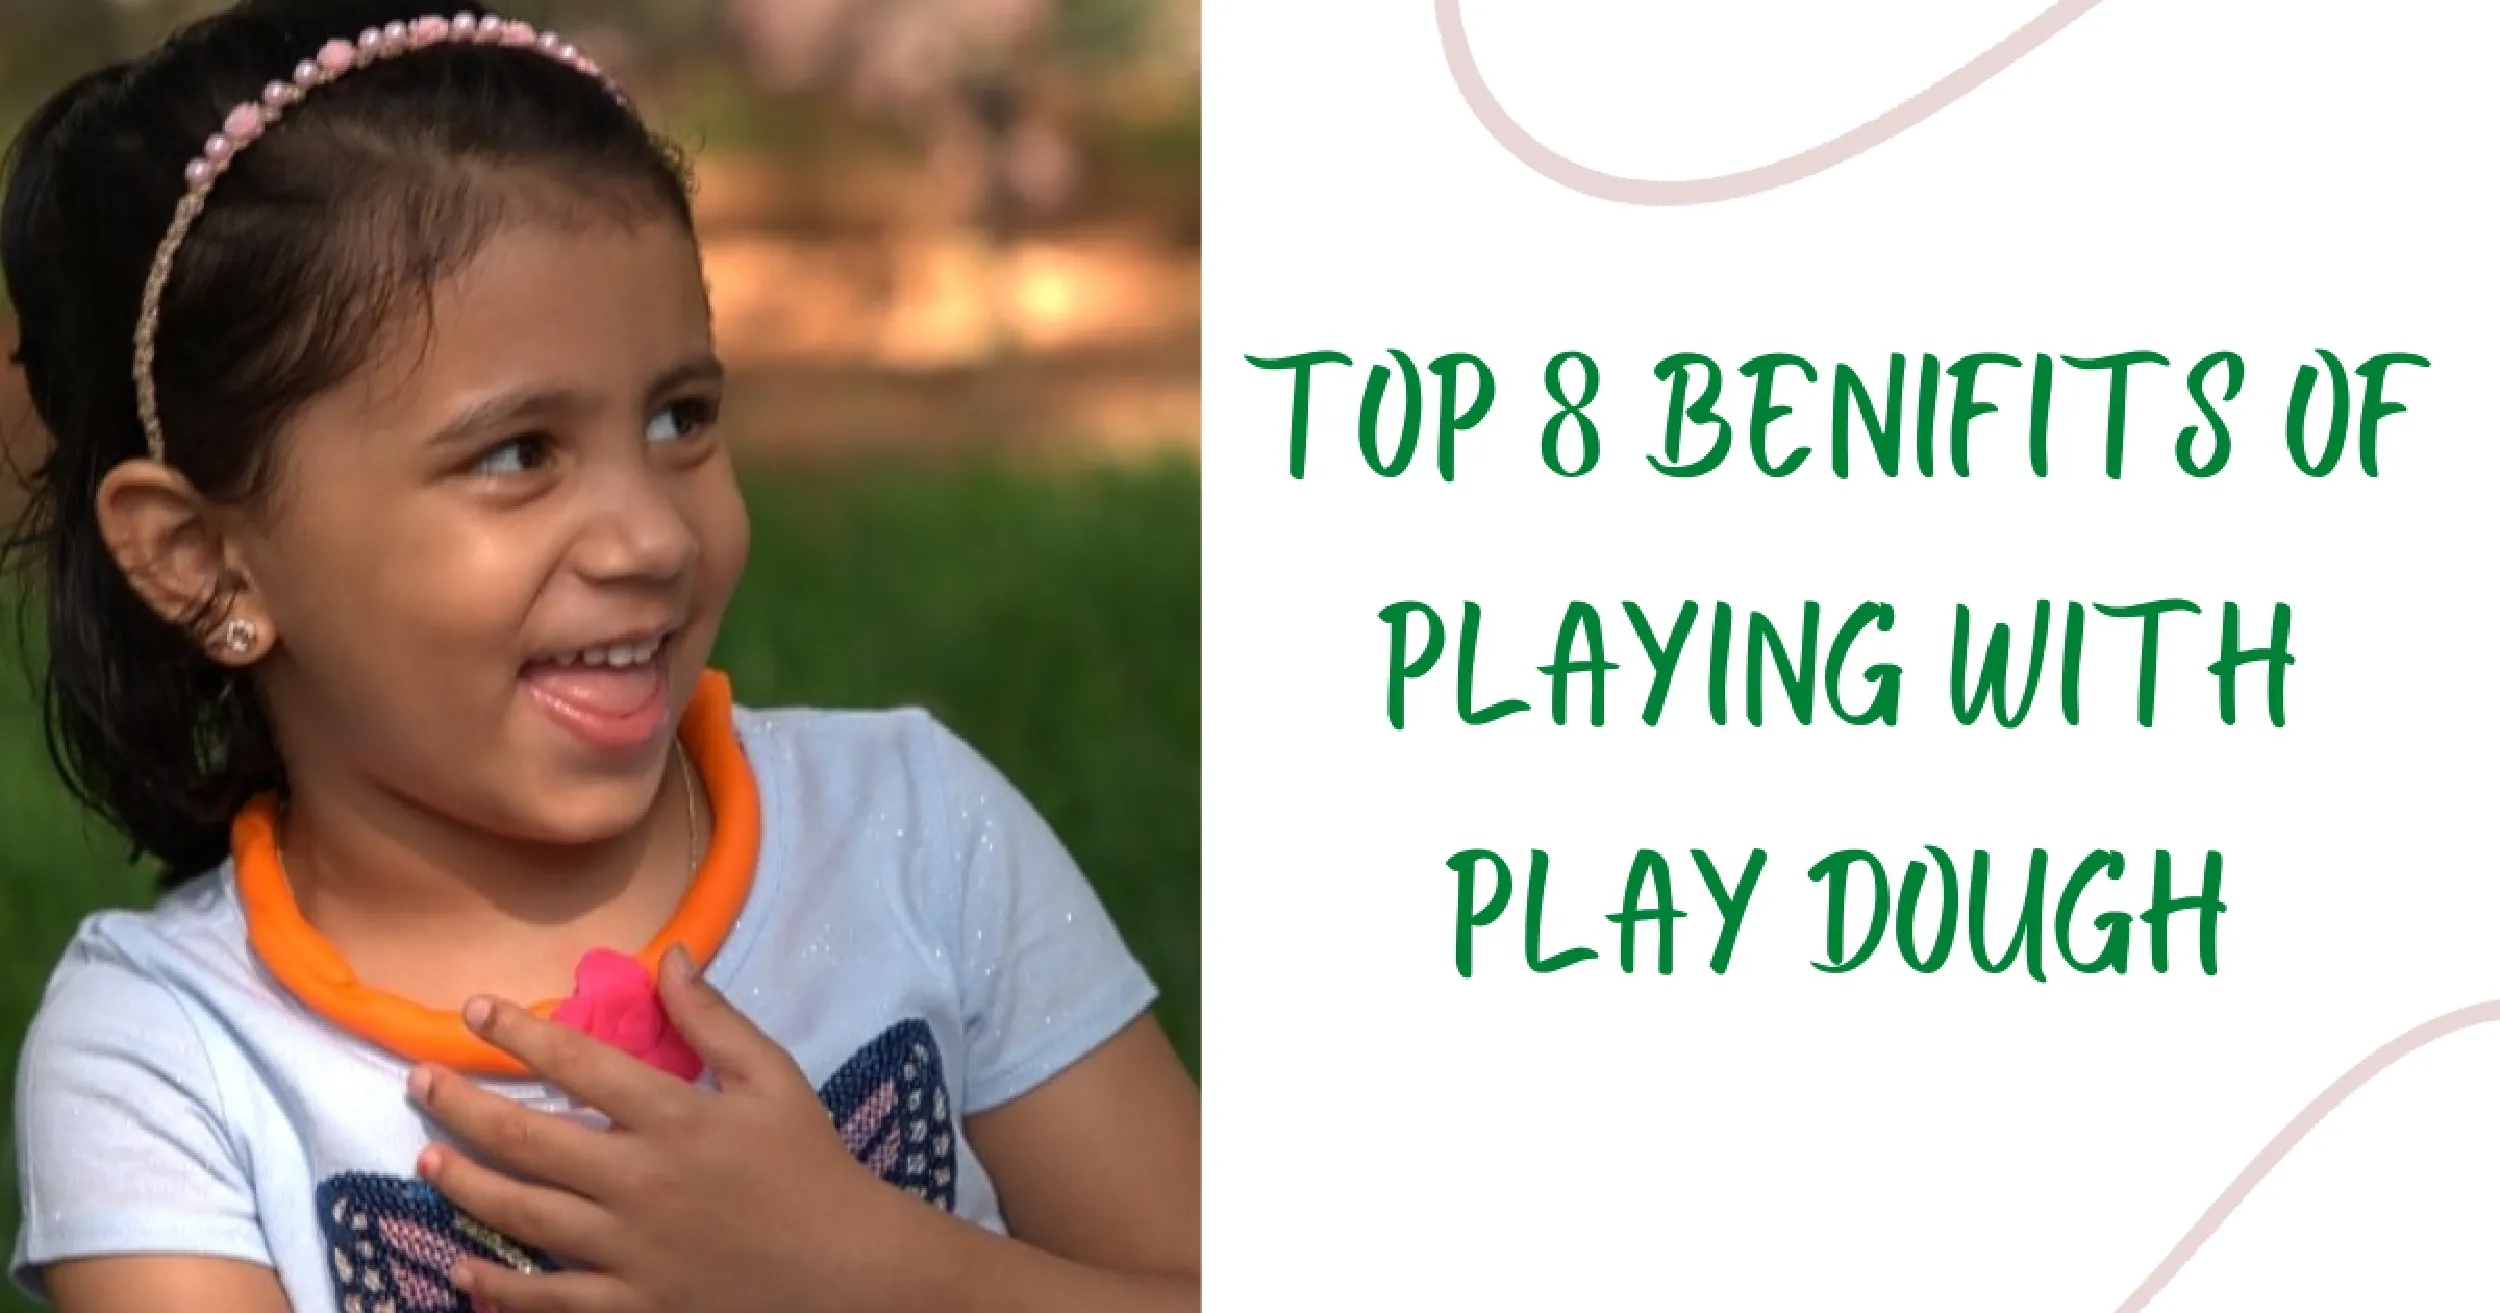 Top 8 Benefits Of Playing With Play Dough | DoughReMom